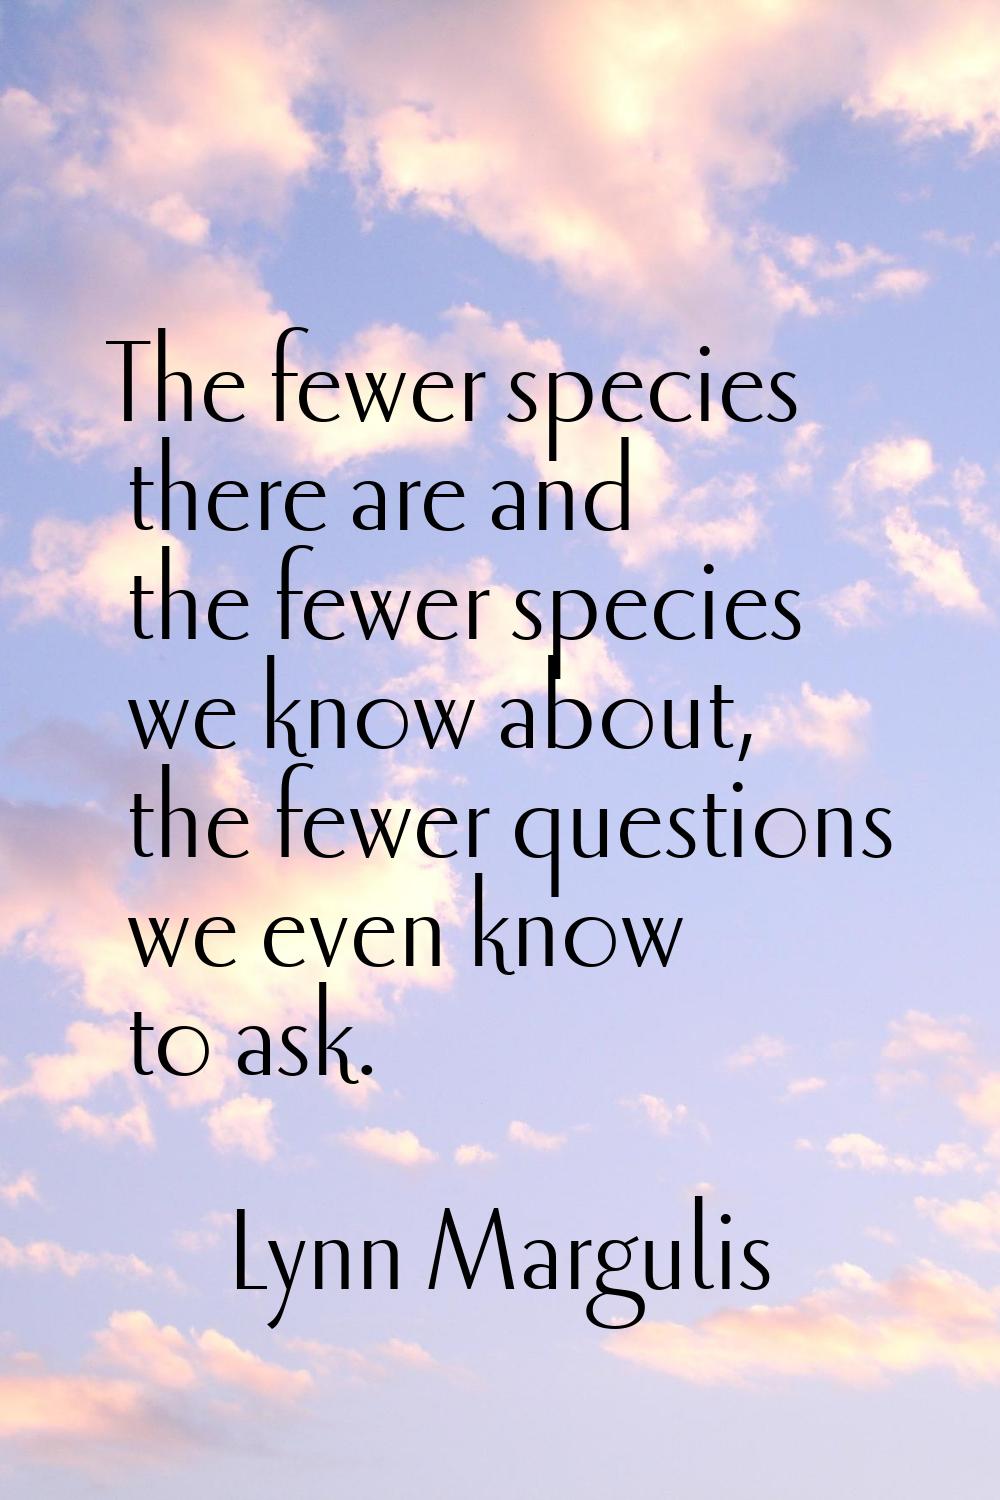 The fewer species there are and the fewer species we know about, the fewer questions we even know t